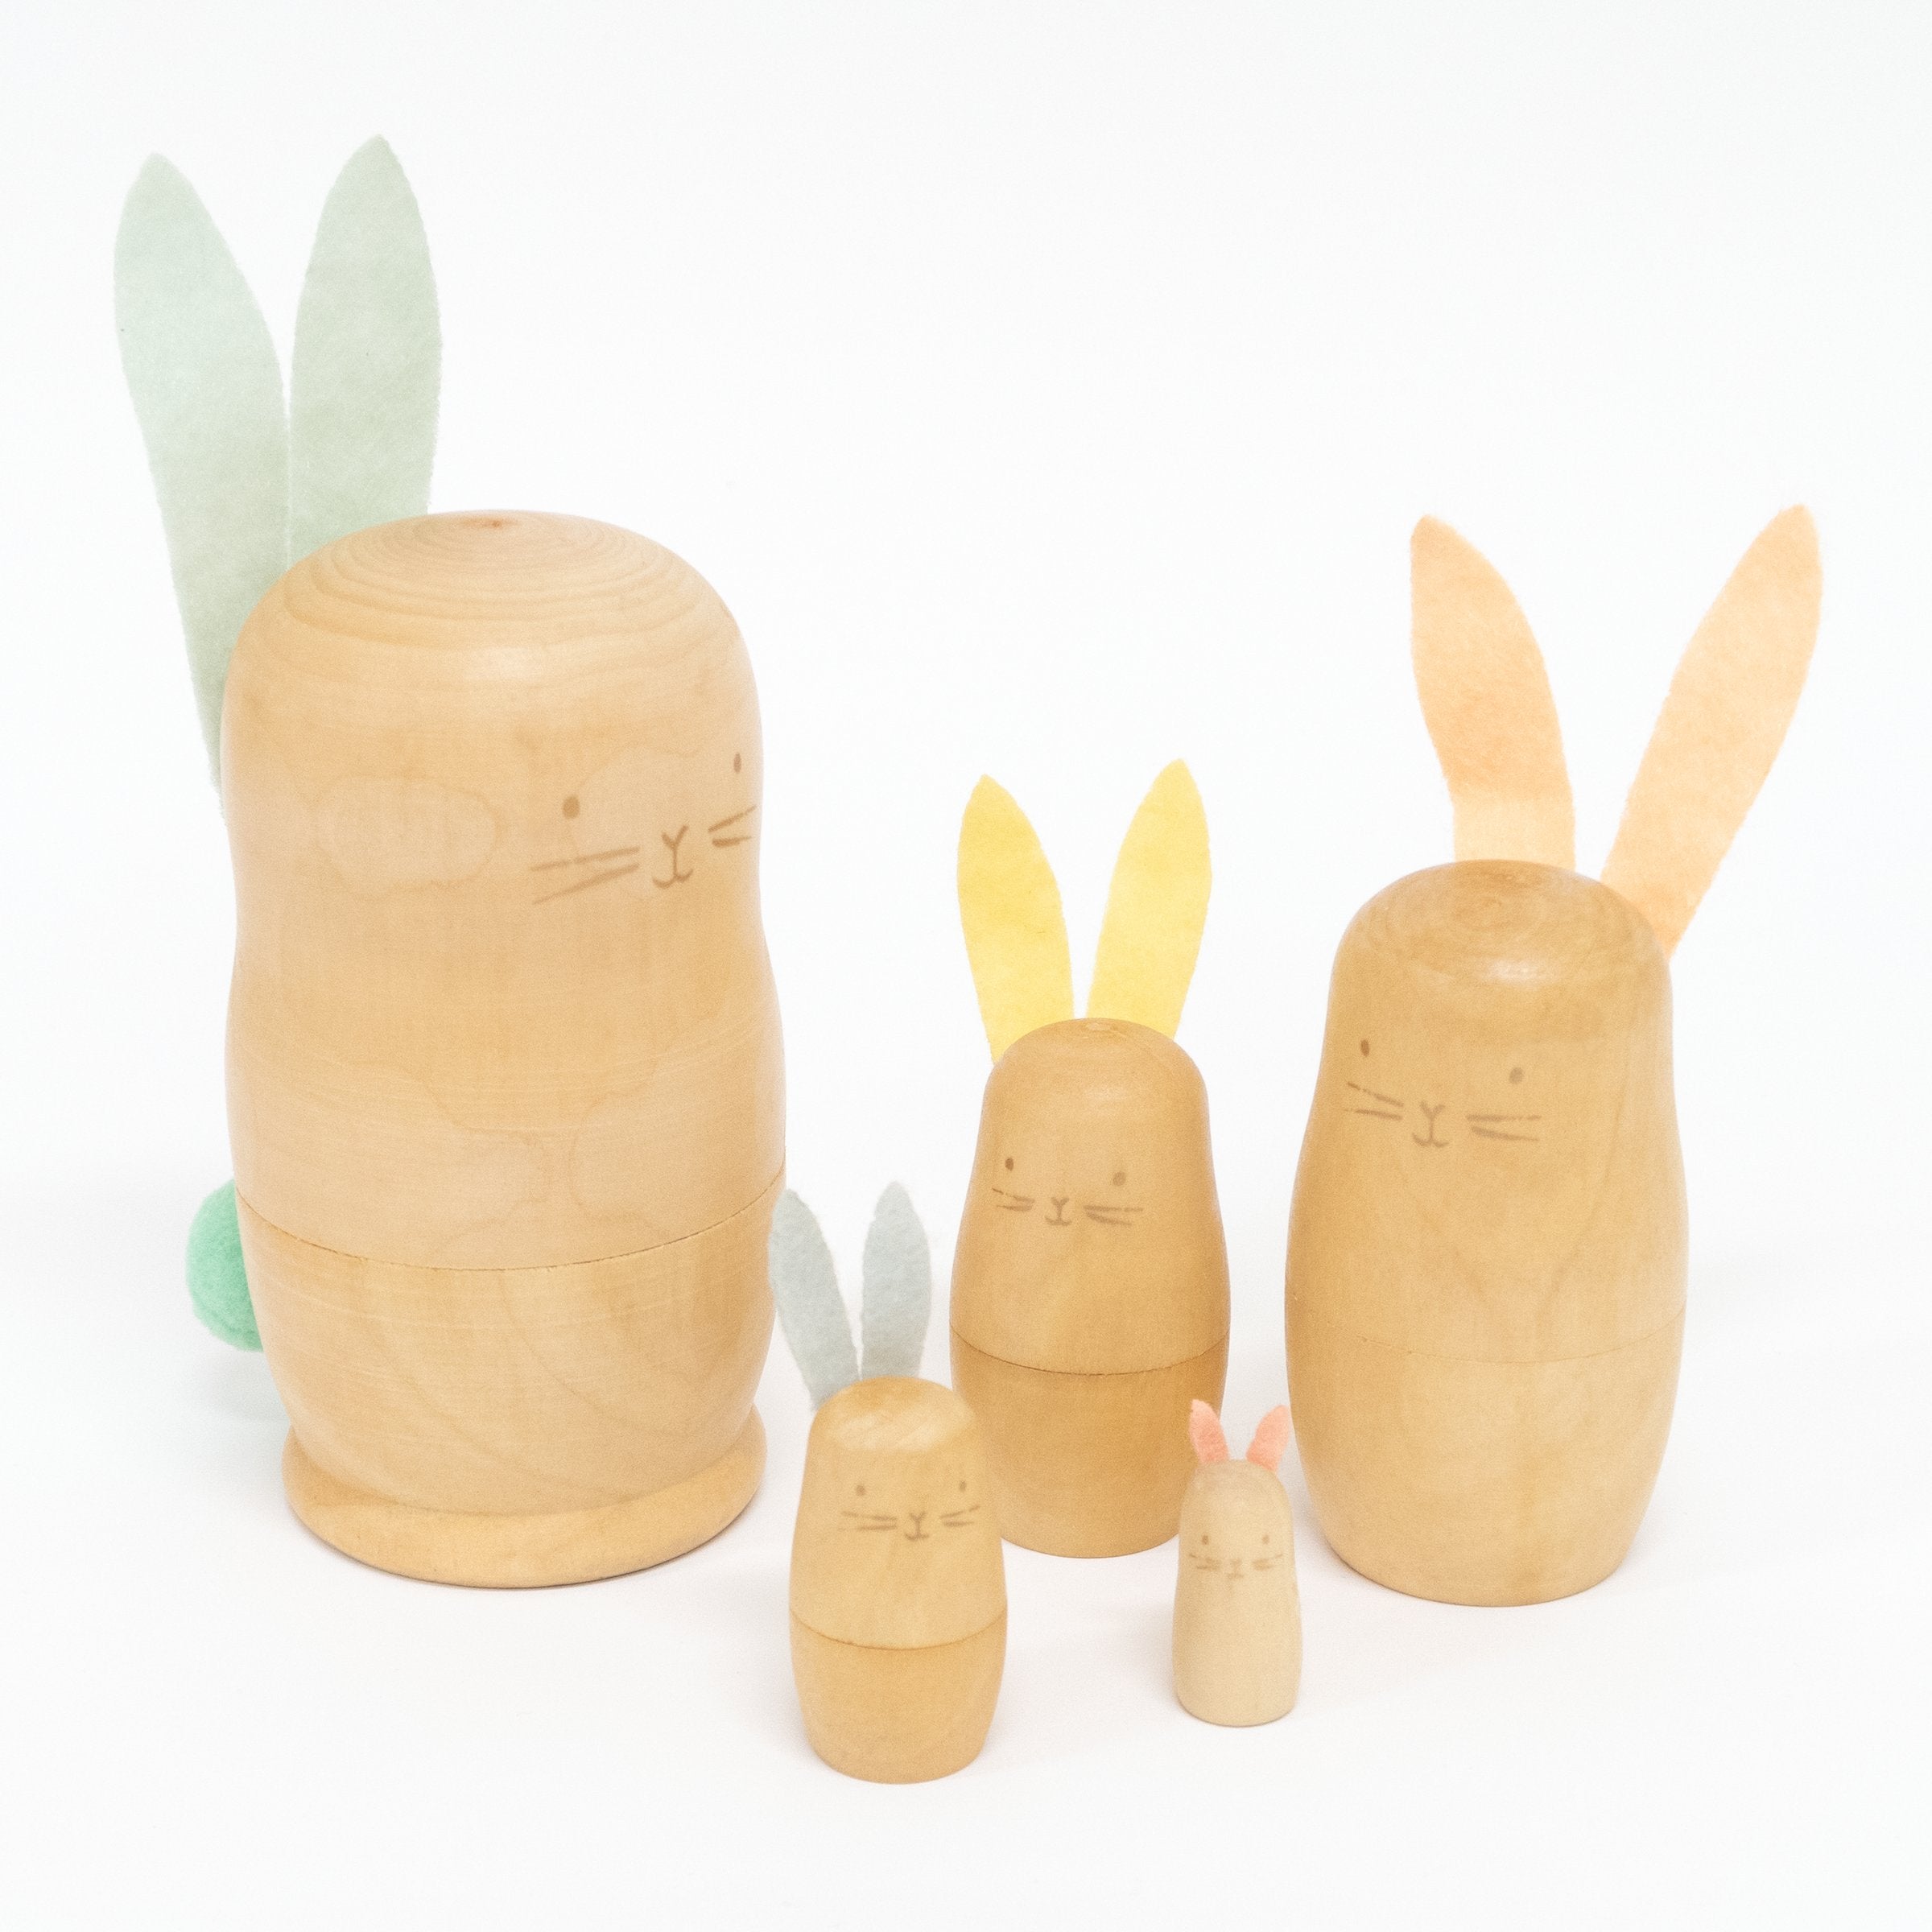 These stacking bunnies are crafted from wood, with gold features, and felt ears and tails.